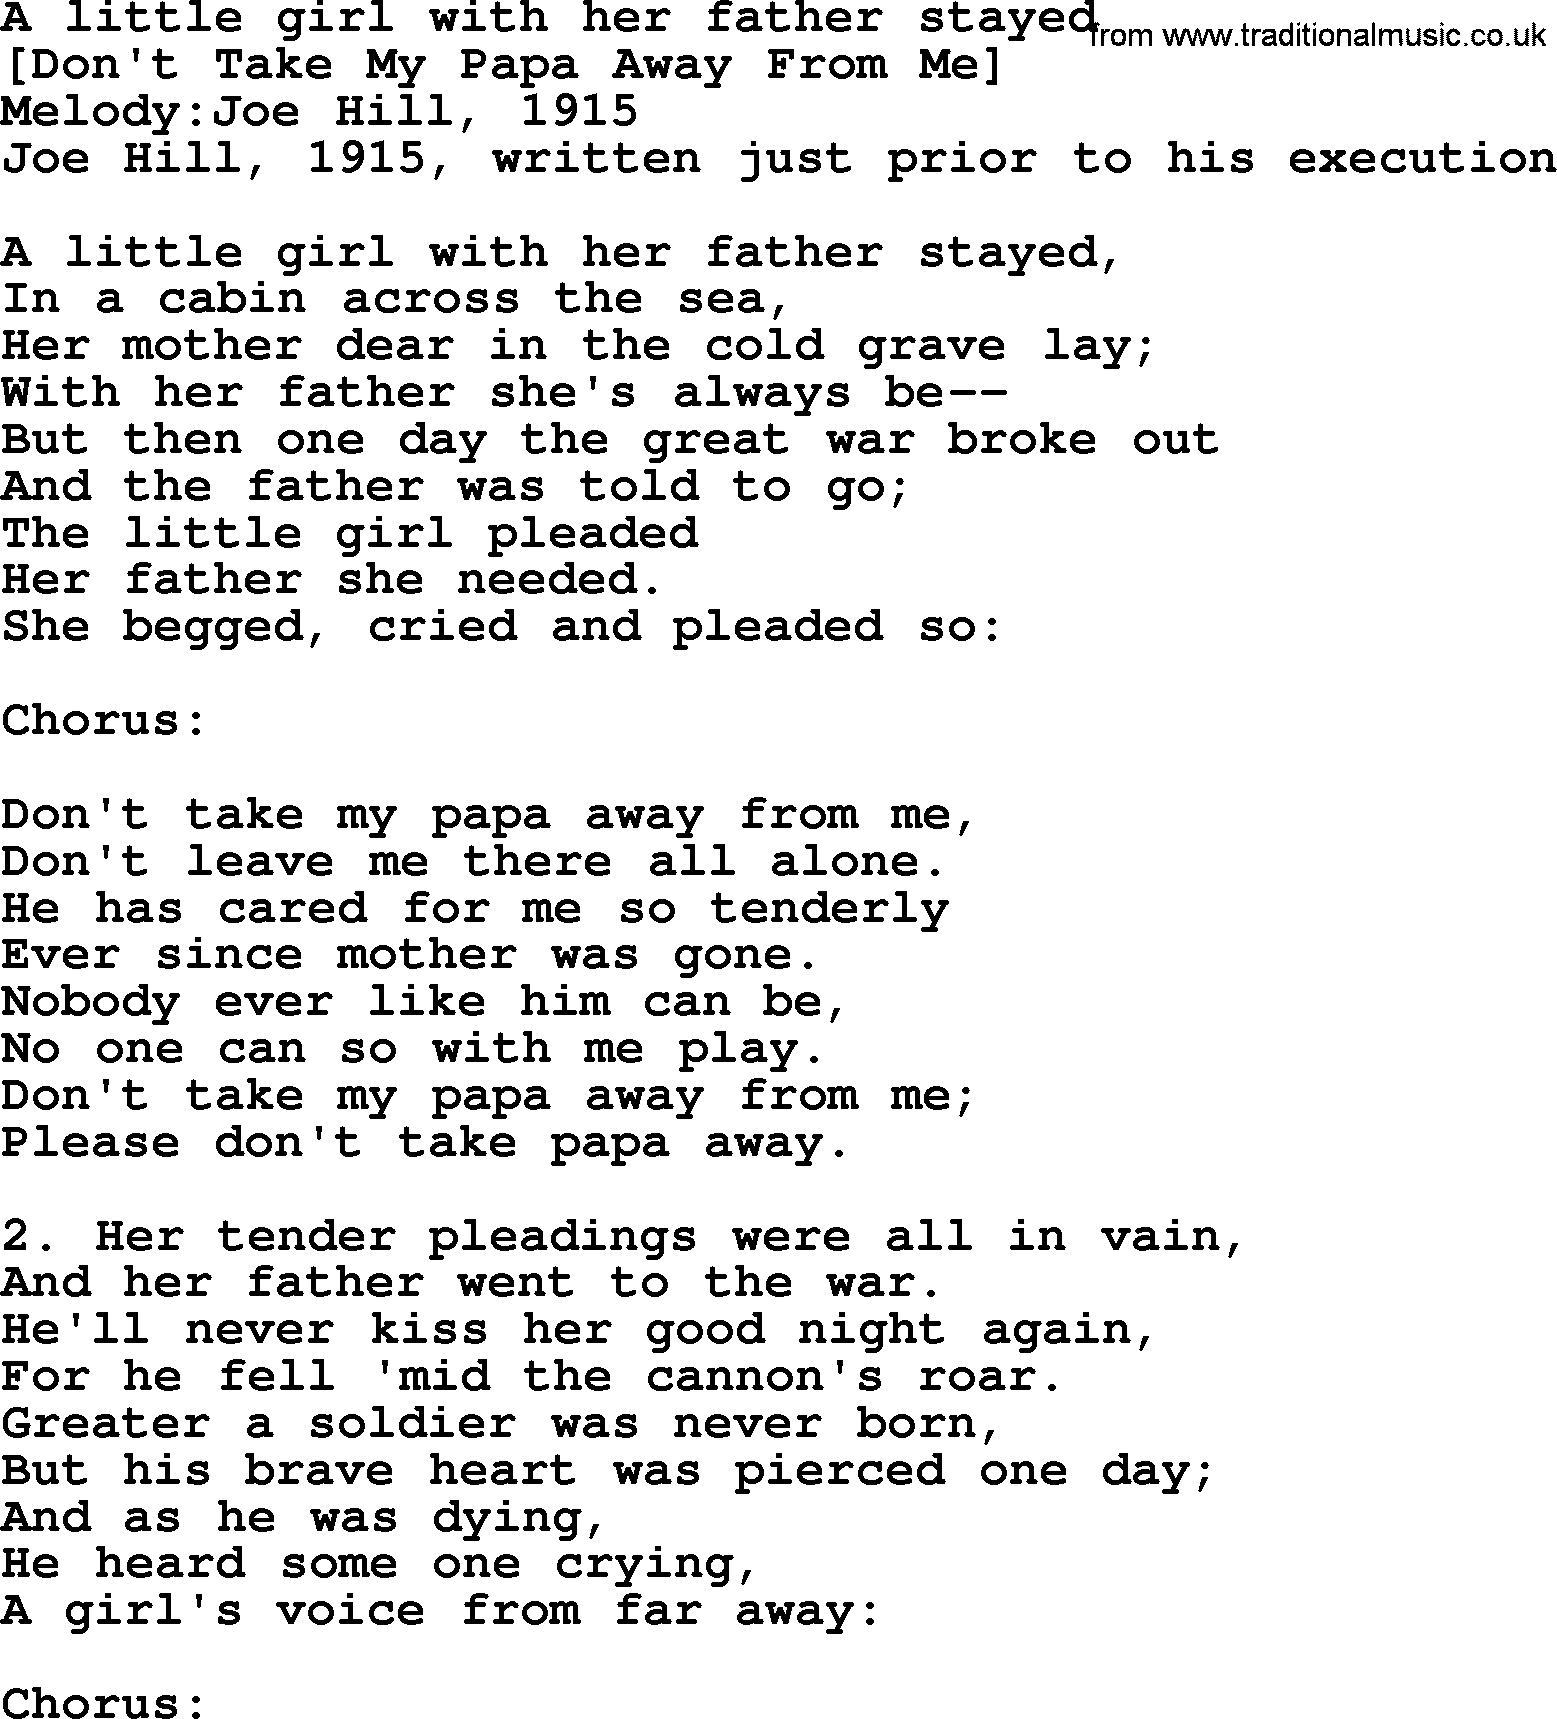 Old American Song: A Little Girl With Her Father Stayed, lyrics